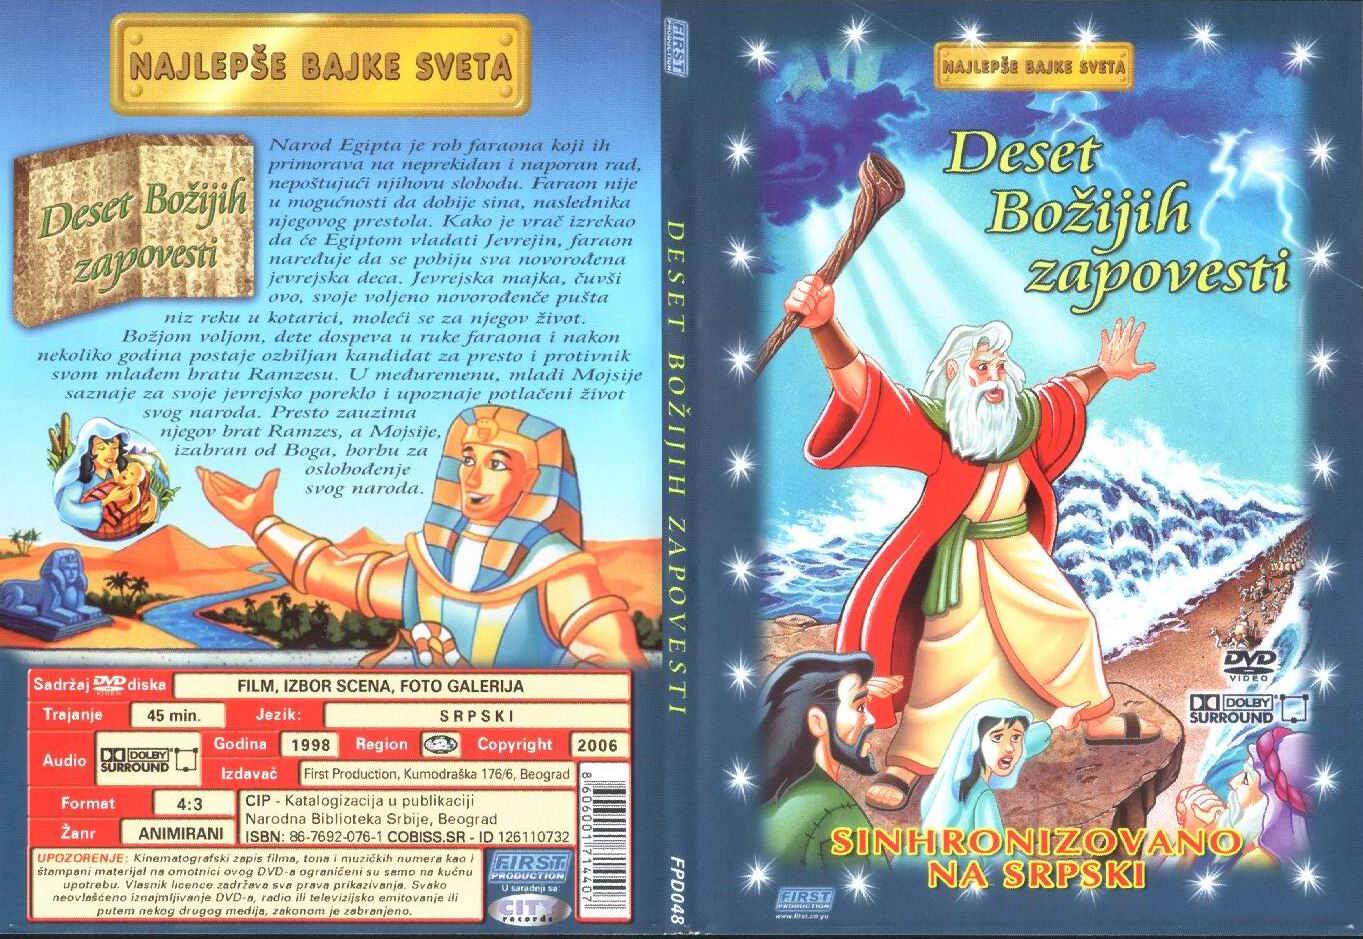 Click to view full size image -  DVD Cover - D - DVD - DESET BOZIJI ZAPOVESTI.jpg - DVD - DESET BOZIJI ZAPOVESTI.jpg